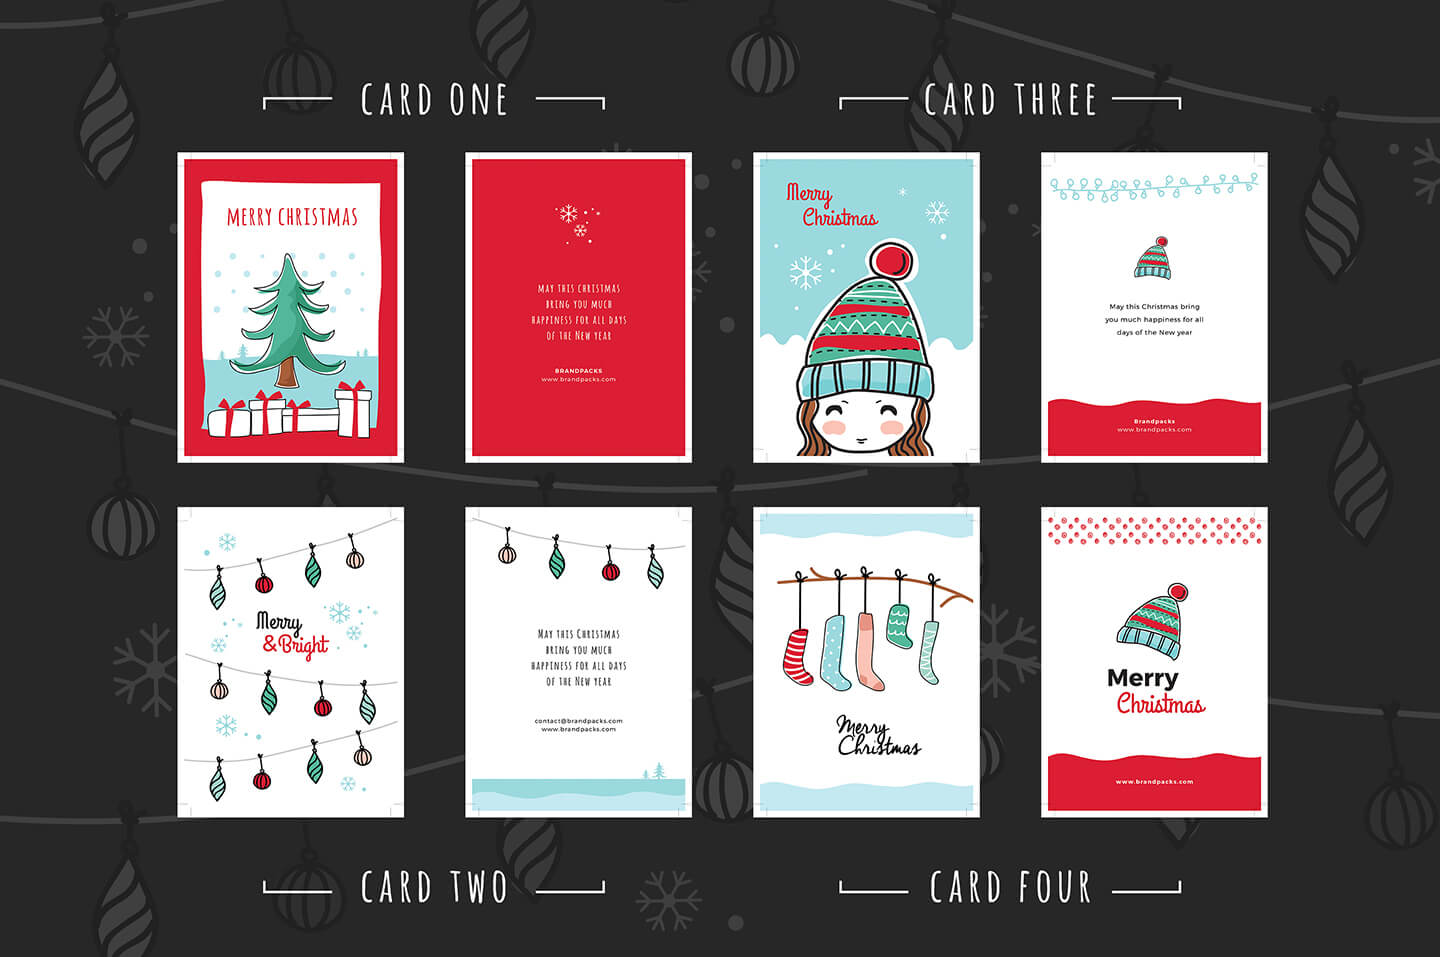 Free Christmas Card Templates For Photoshop & Illustrator Intended For Christmas Photo Card Templates Photoshop